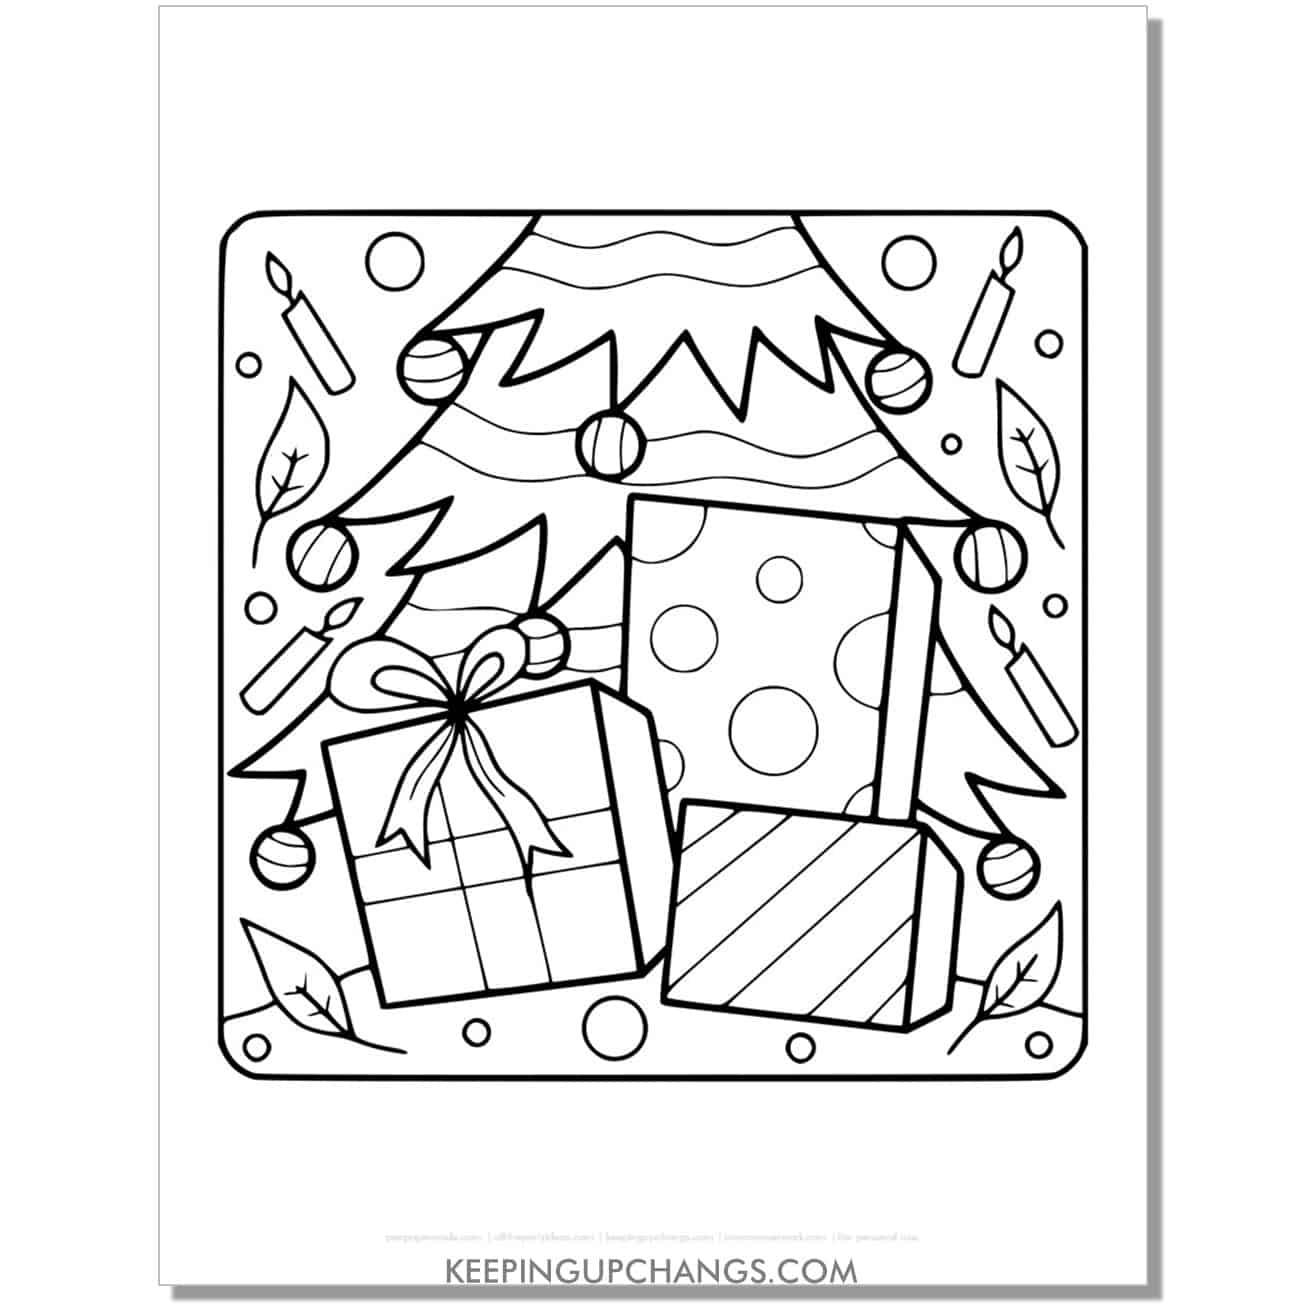 https://keepingupchangs.com/wp-content/uploads/free-full-size-toddler-preschool-gifts-christmas-tree-coloring-page-colouring-sheet.jpg